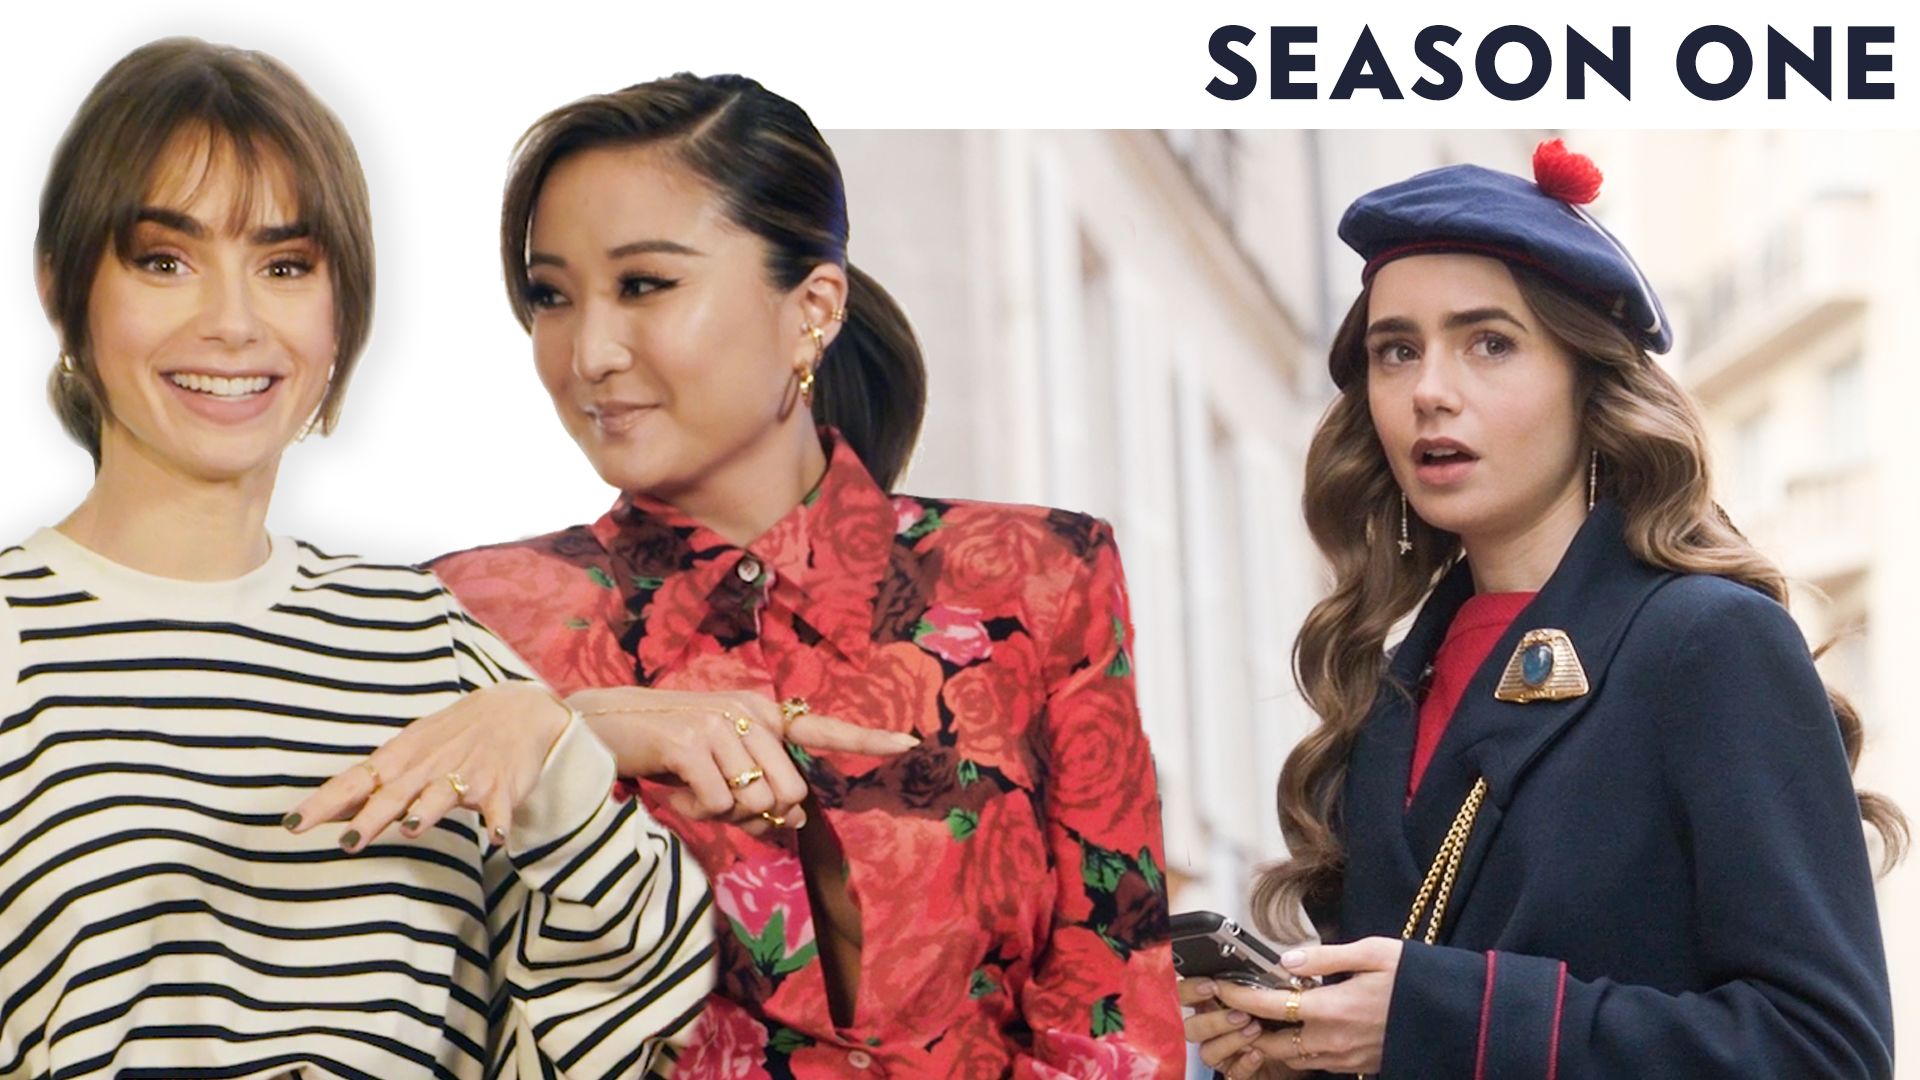 Emily in Paris Season 1 Cast: Who Plays Emily, Mindy, Gabriel, and More